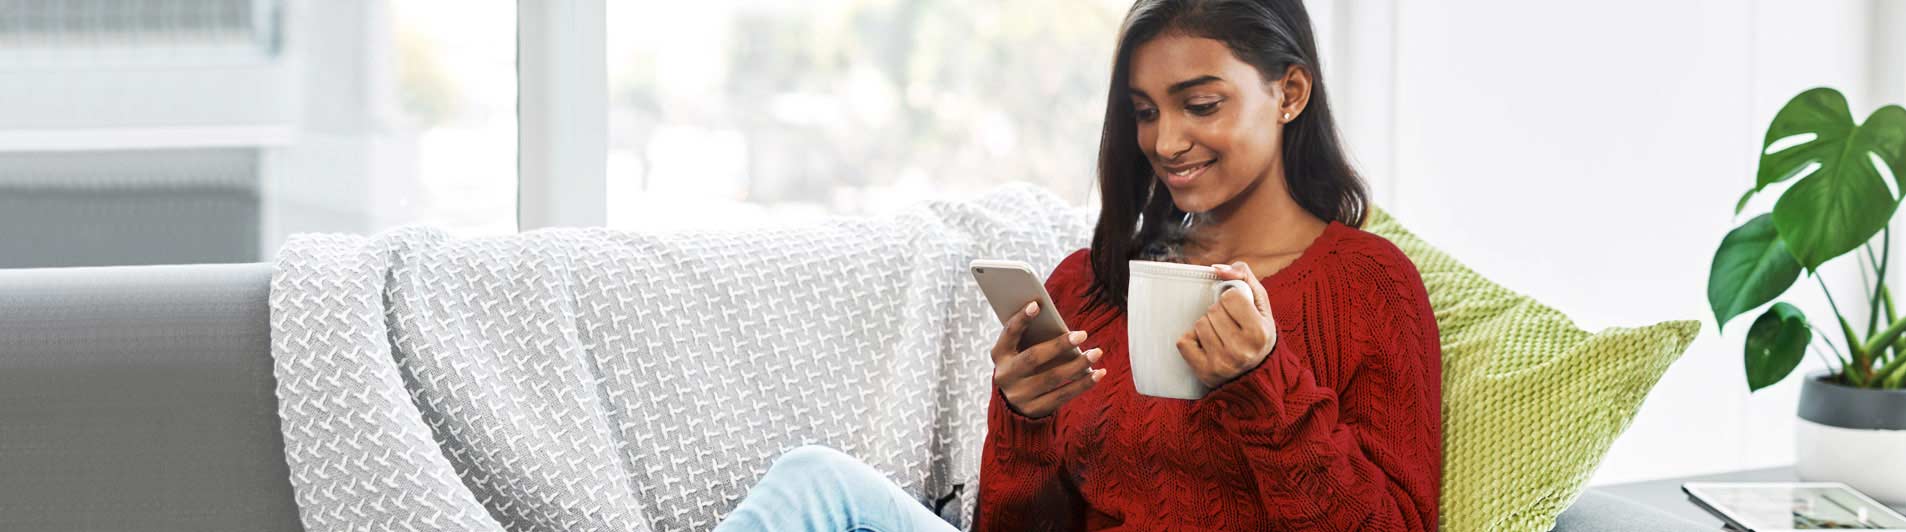 young woman sitting on couch while viewing mobile phone